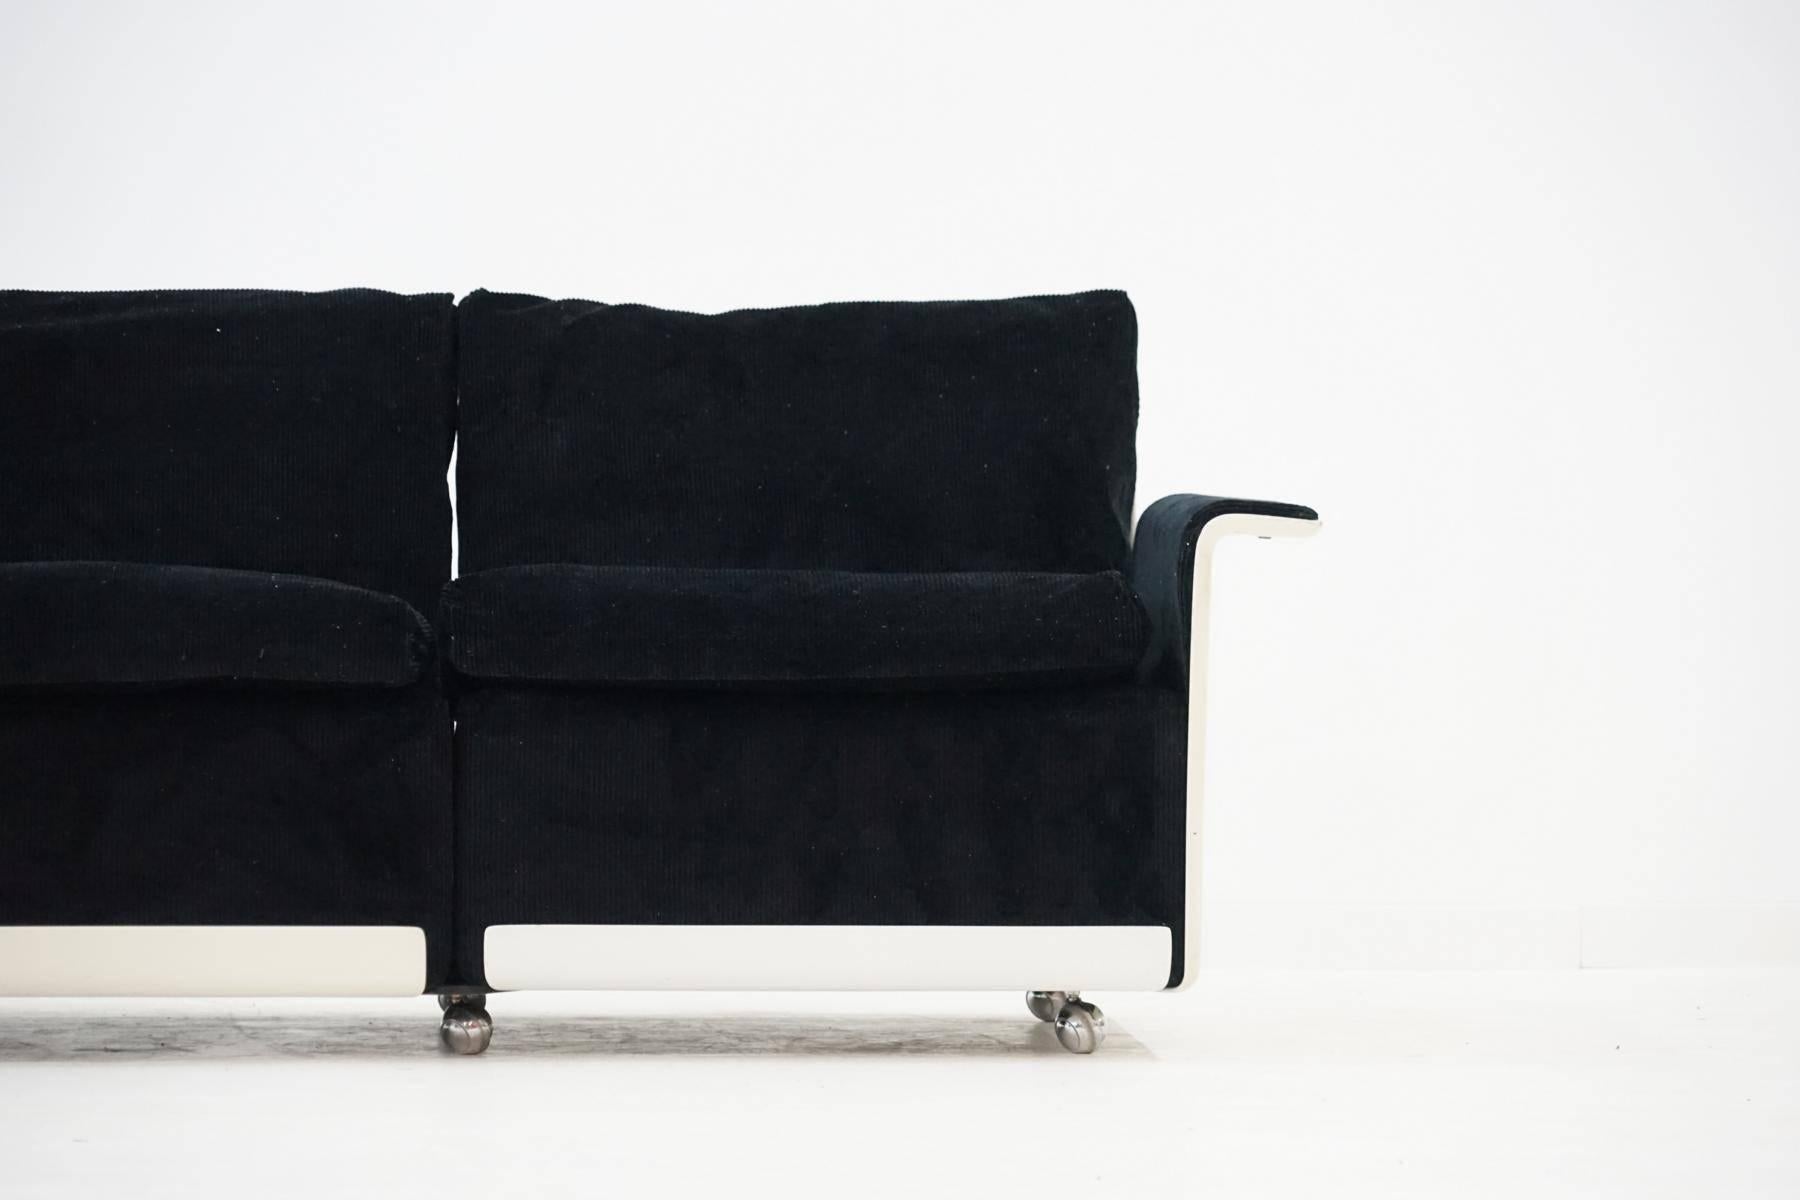 20th Century Three-Seat Sofa and Armchairs by Dieter Rams for Vitsoe, RZ 62 620